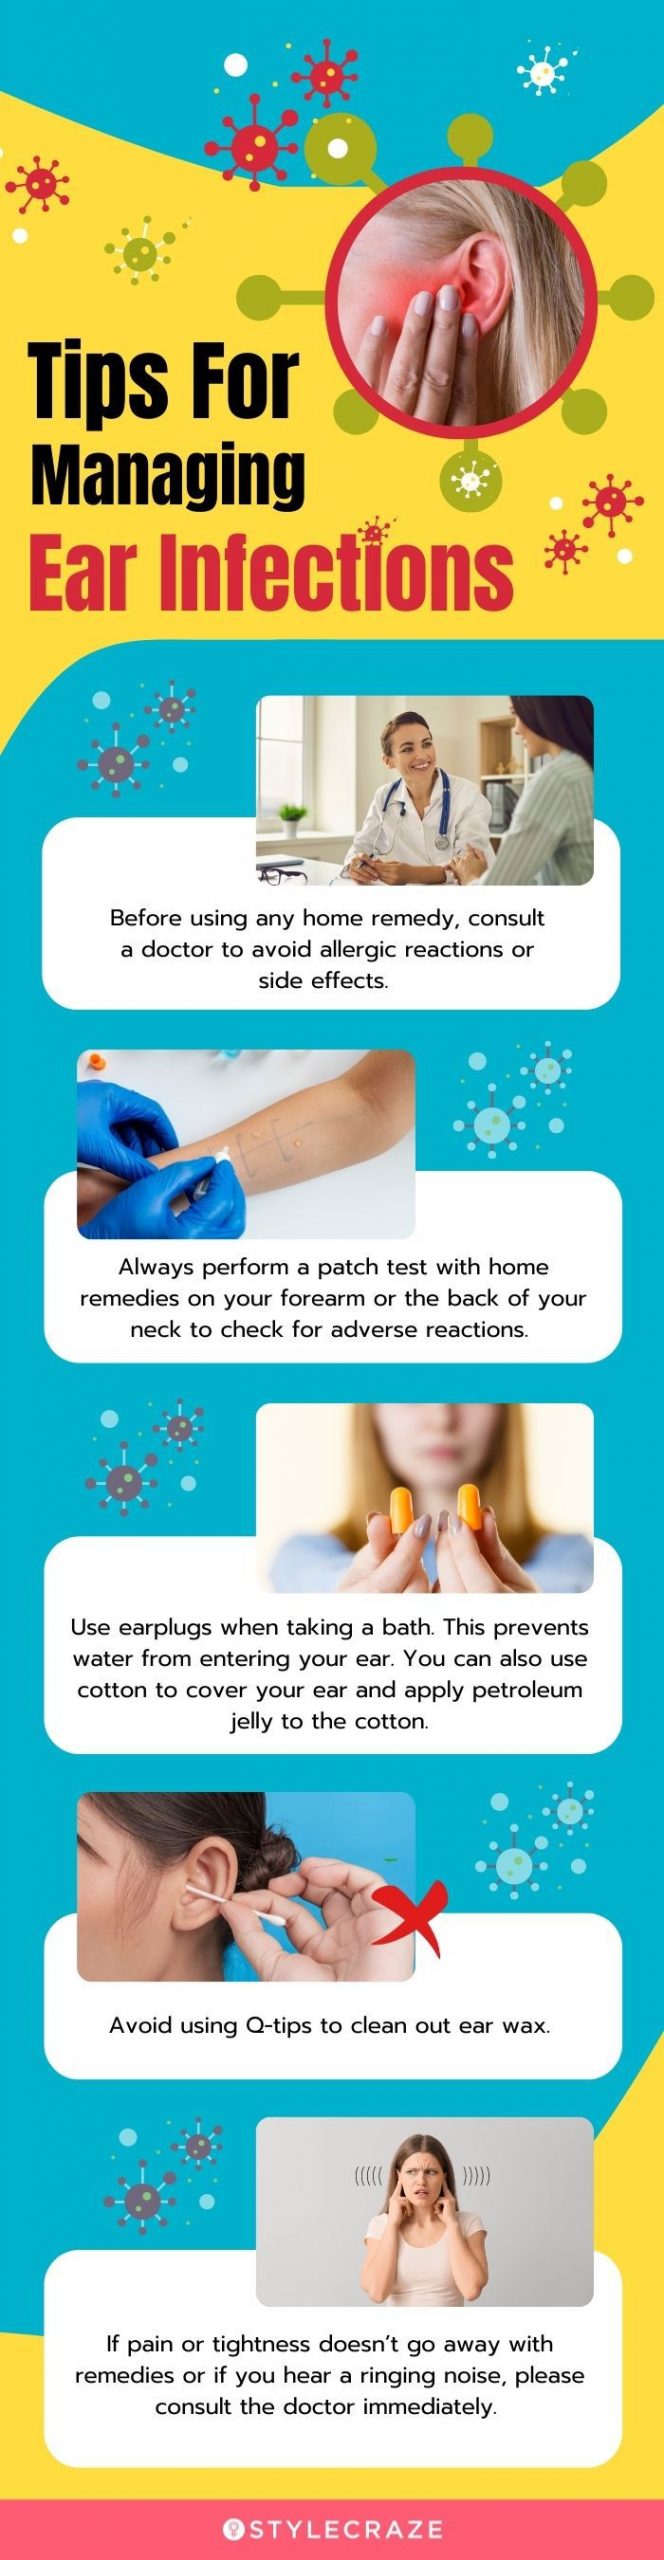 tips for managing ear infections (infographic)